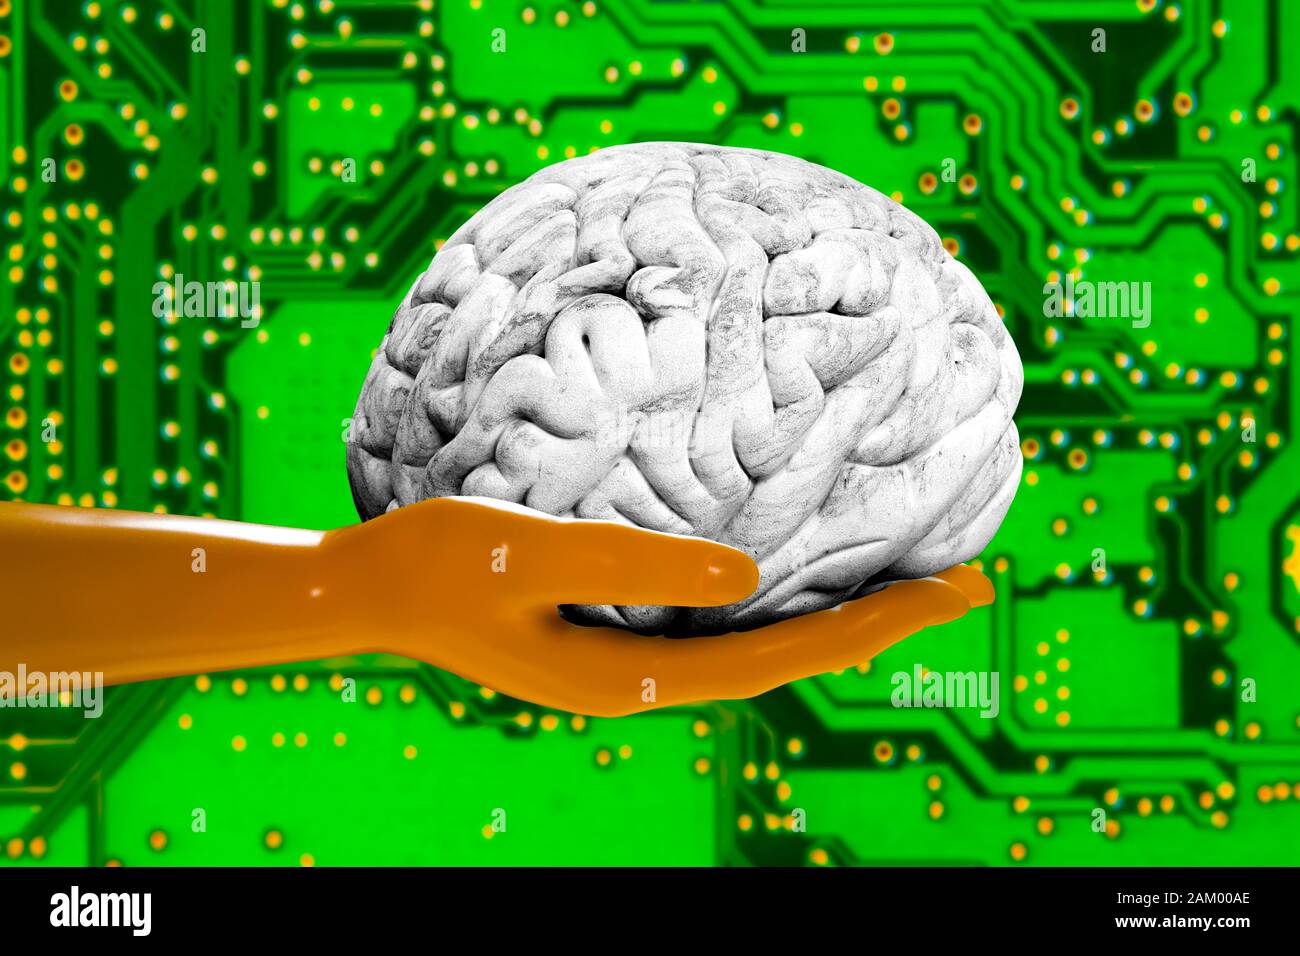 Brain on mannequin's hand with circuit board Stock Photo